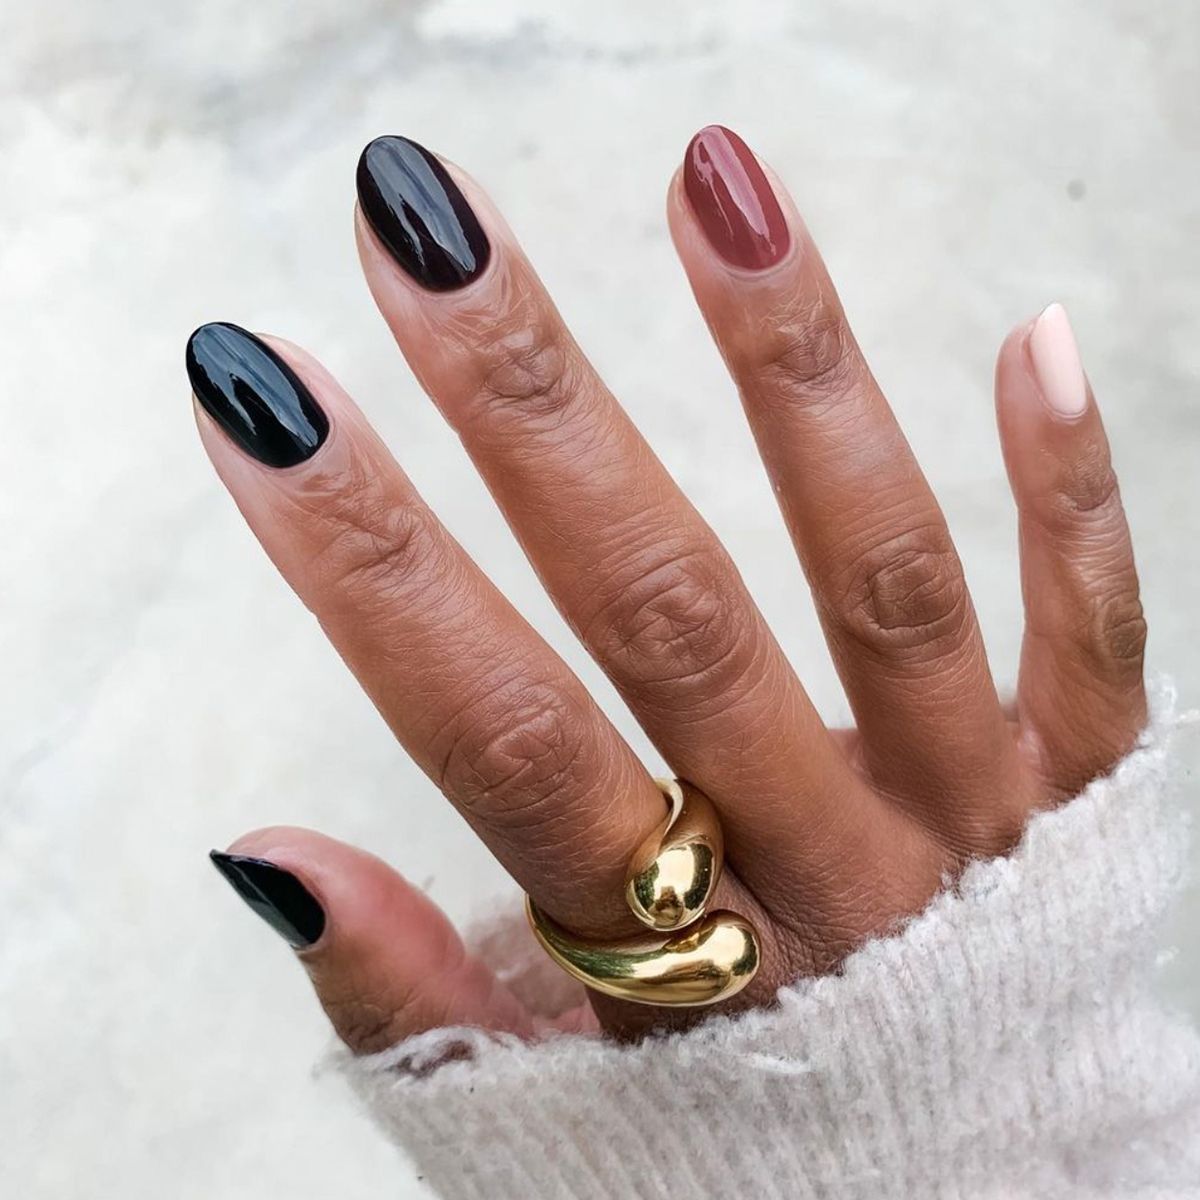 40+ Cream And Black Nail Designs That Are Timeless And Elegant